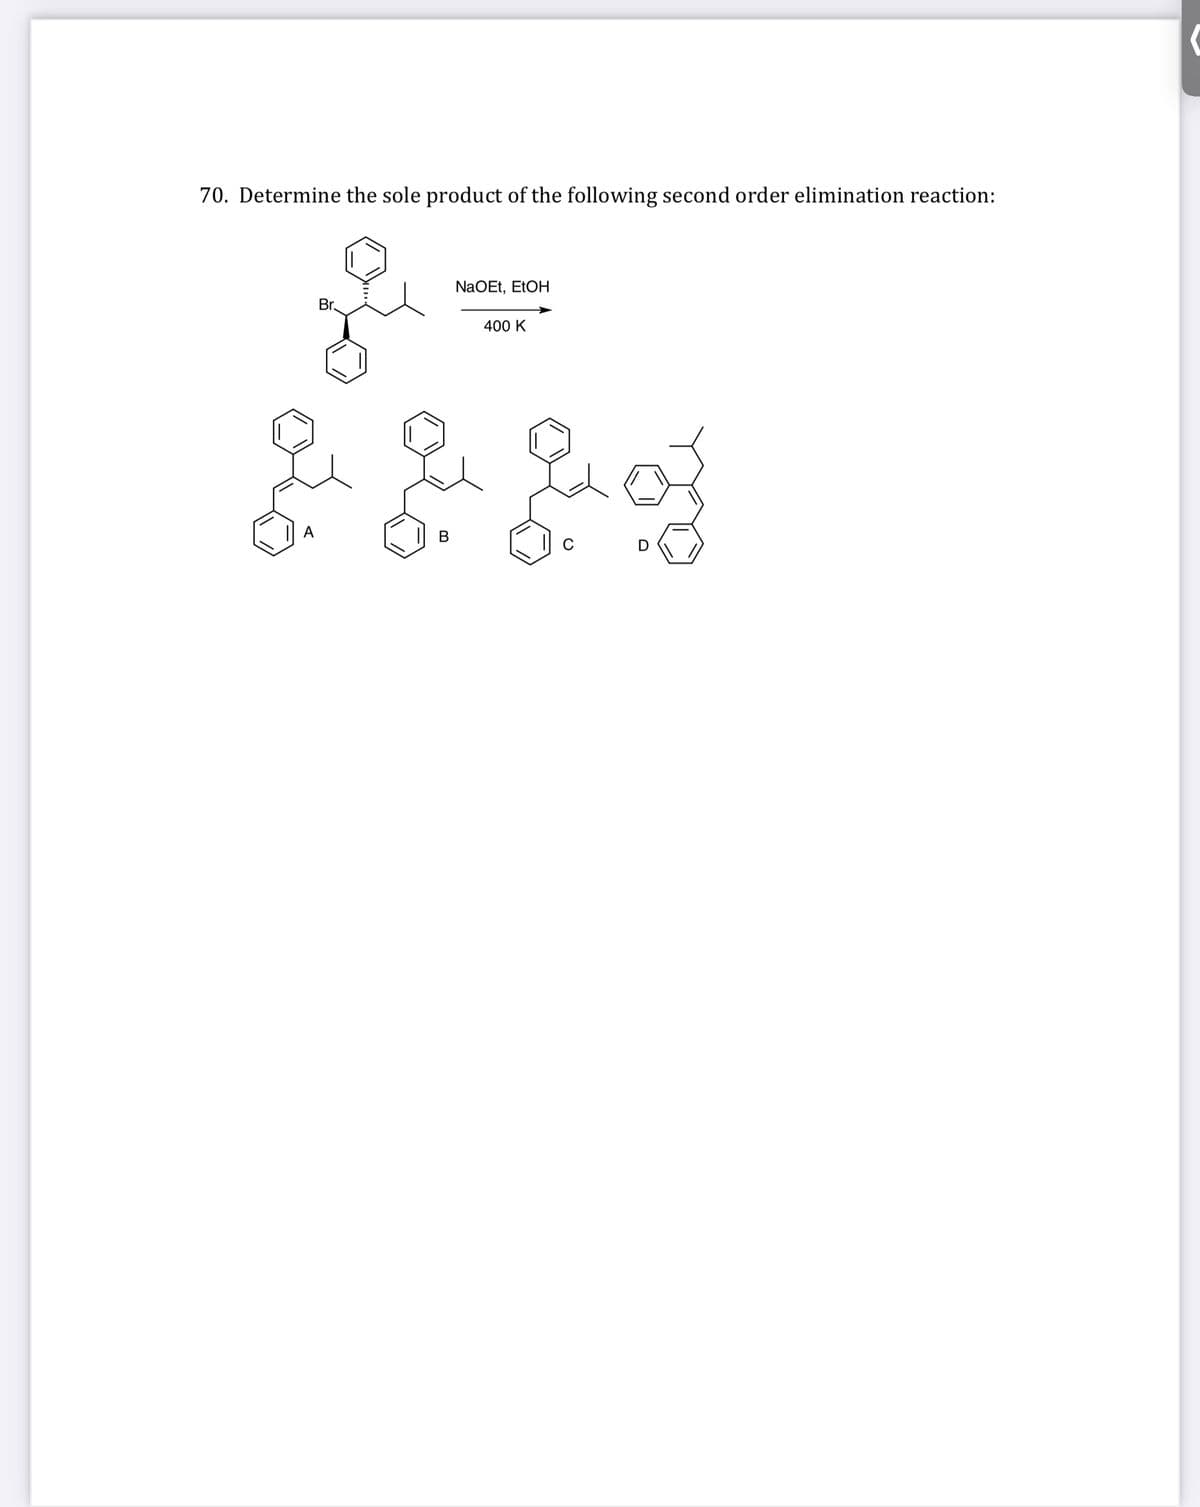 70. Determine the sole product of the following second order elimination reaction:
NaOEt, ELOH
Br.
400 K
A
